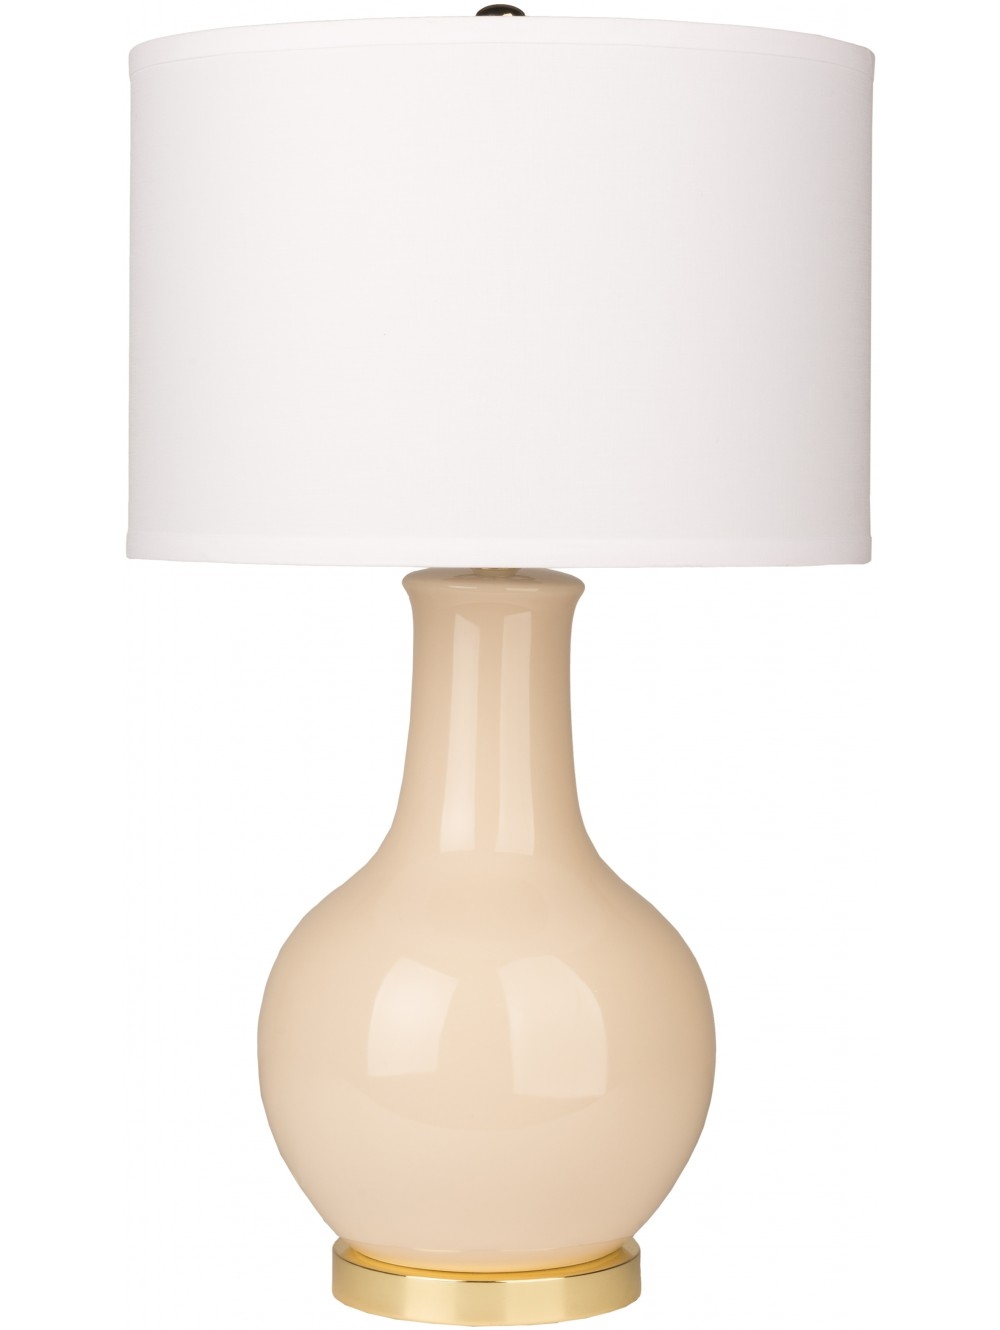 ALEXIS TABLE LAMP, DUSTY PINK - Image 0